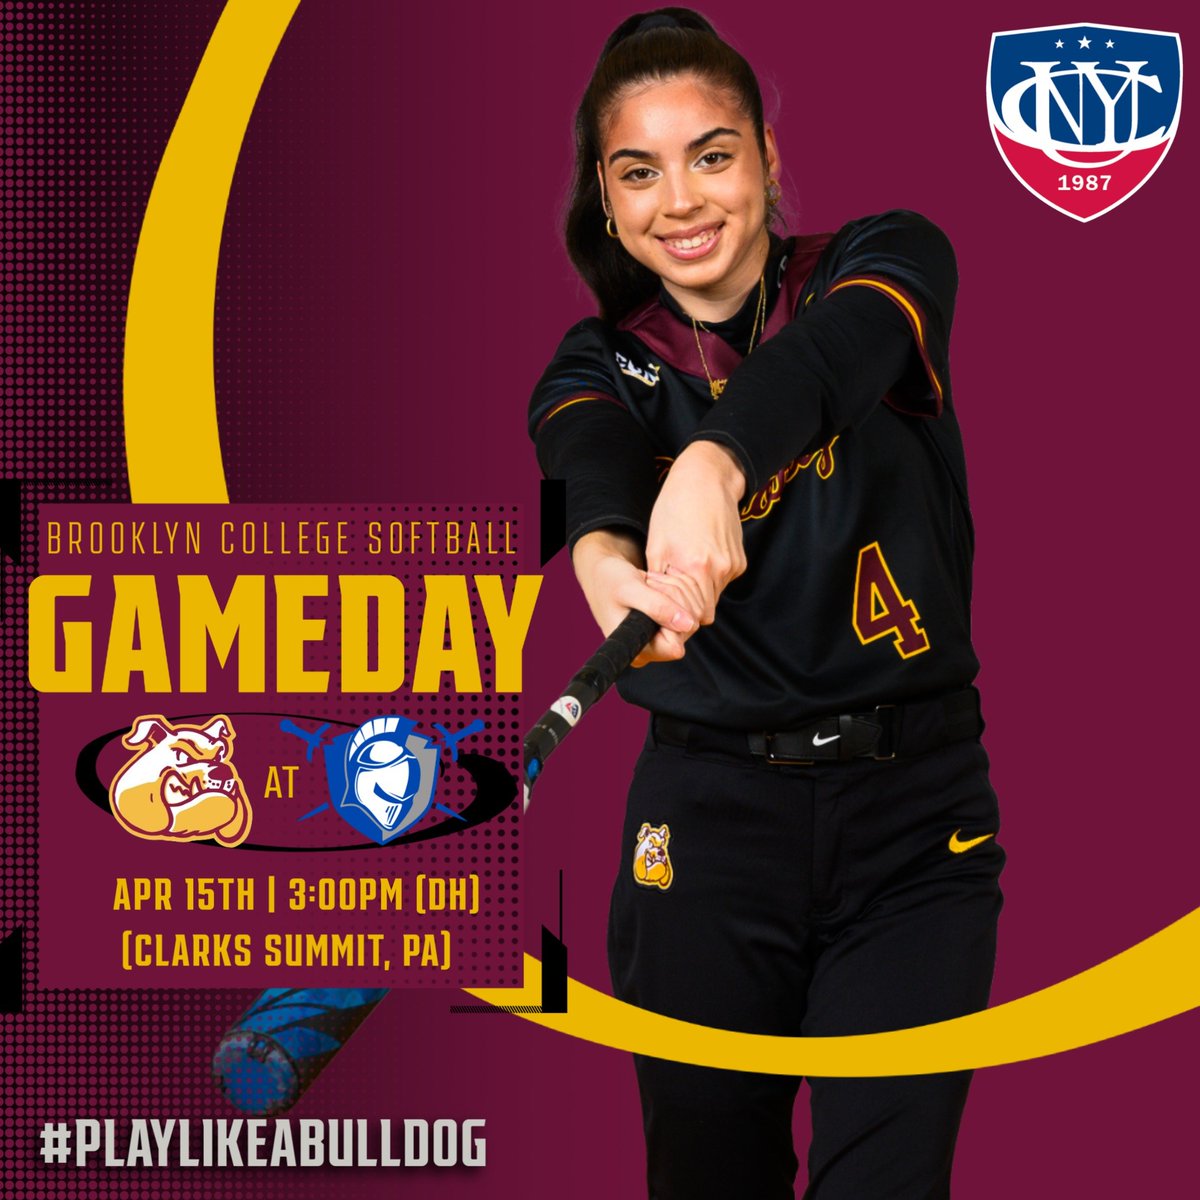 #Gameday | 🥎 #BCsb is on the road for a non-conference double bill to start the week! 🐶 🆚 @csudefenders 📍Clarks Summit, PA ⌚3pm (DH) 📺📊brooklyncollegeathletics.com/coverage #PlayLikeaBulldog #d3sb #cunysb